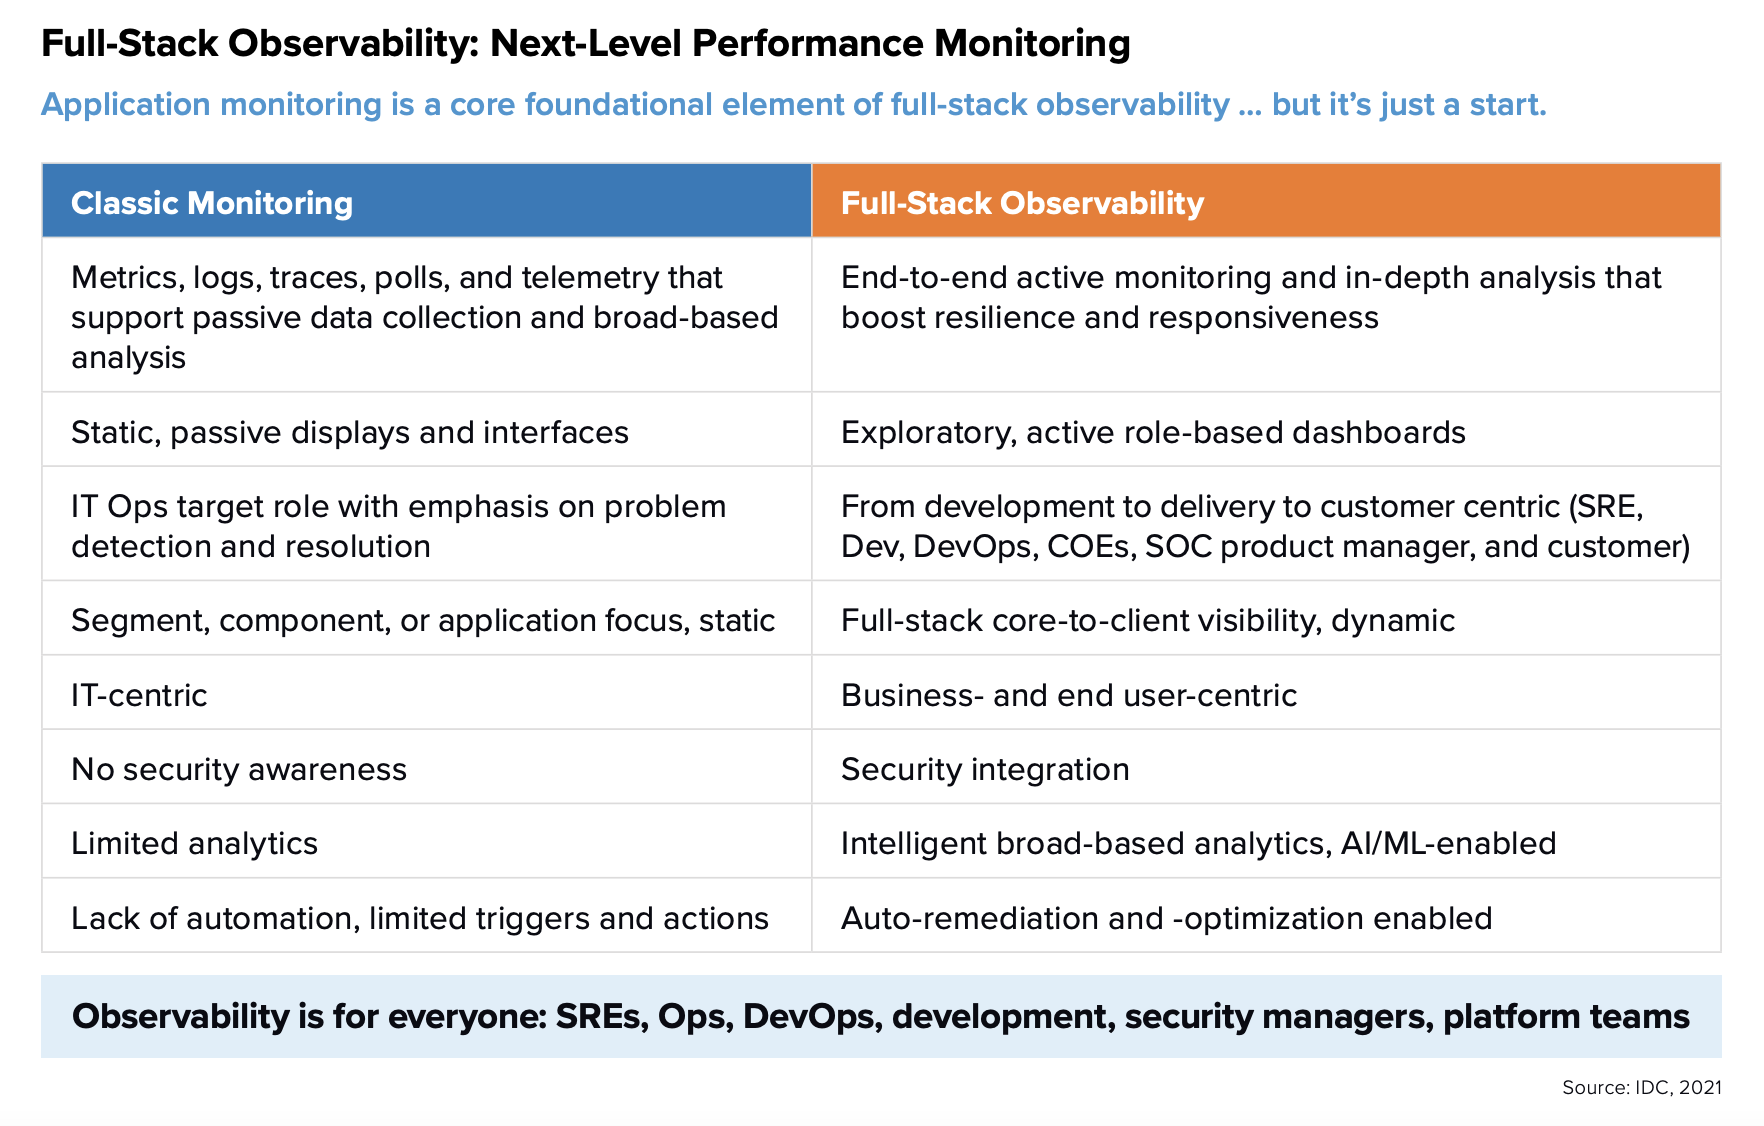 Table comparing monitoring and full-stack observability